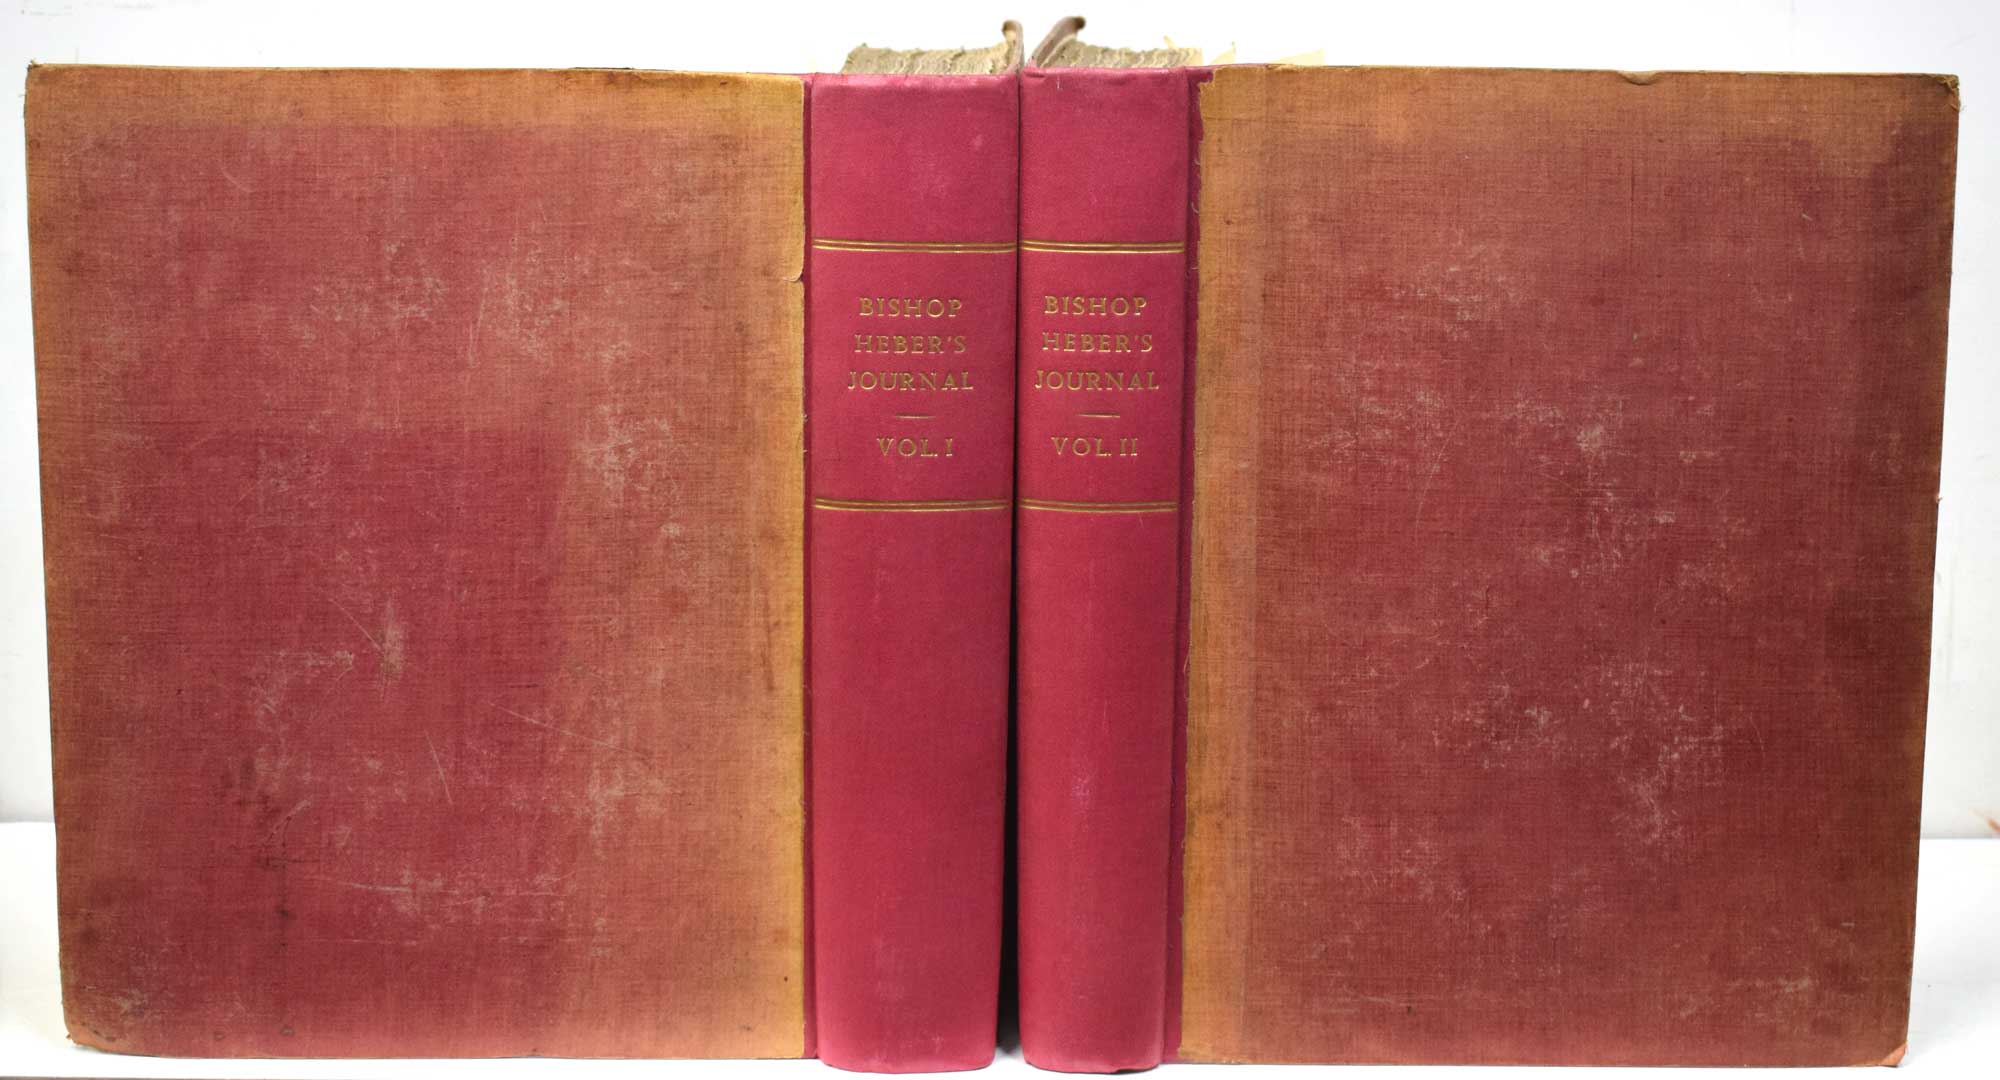 Narrative of a Journey through the Upper Provinces of India from Calcutta to Bombay 1824-1825 [with notes upon Ceylon]. An Account of A Journey to Madras and the Southern Provinces, 1826, and Letters Written in India. 2 volume set.